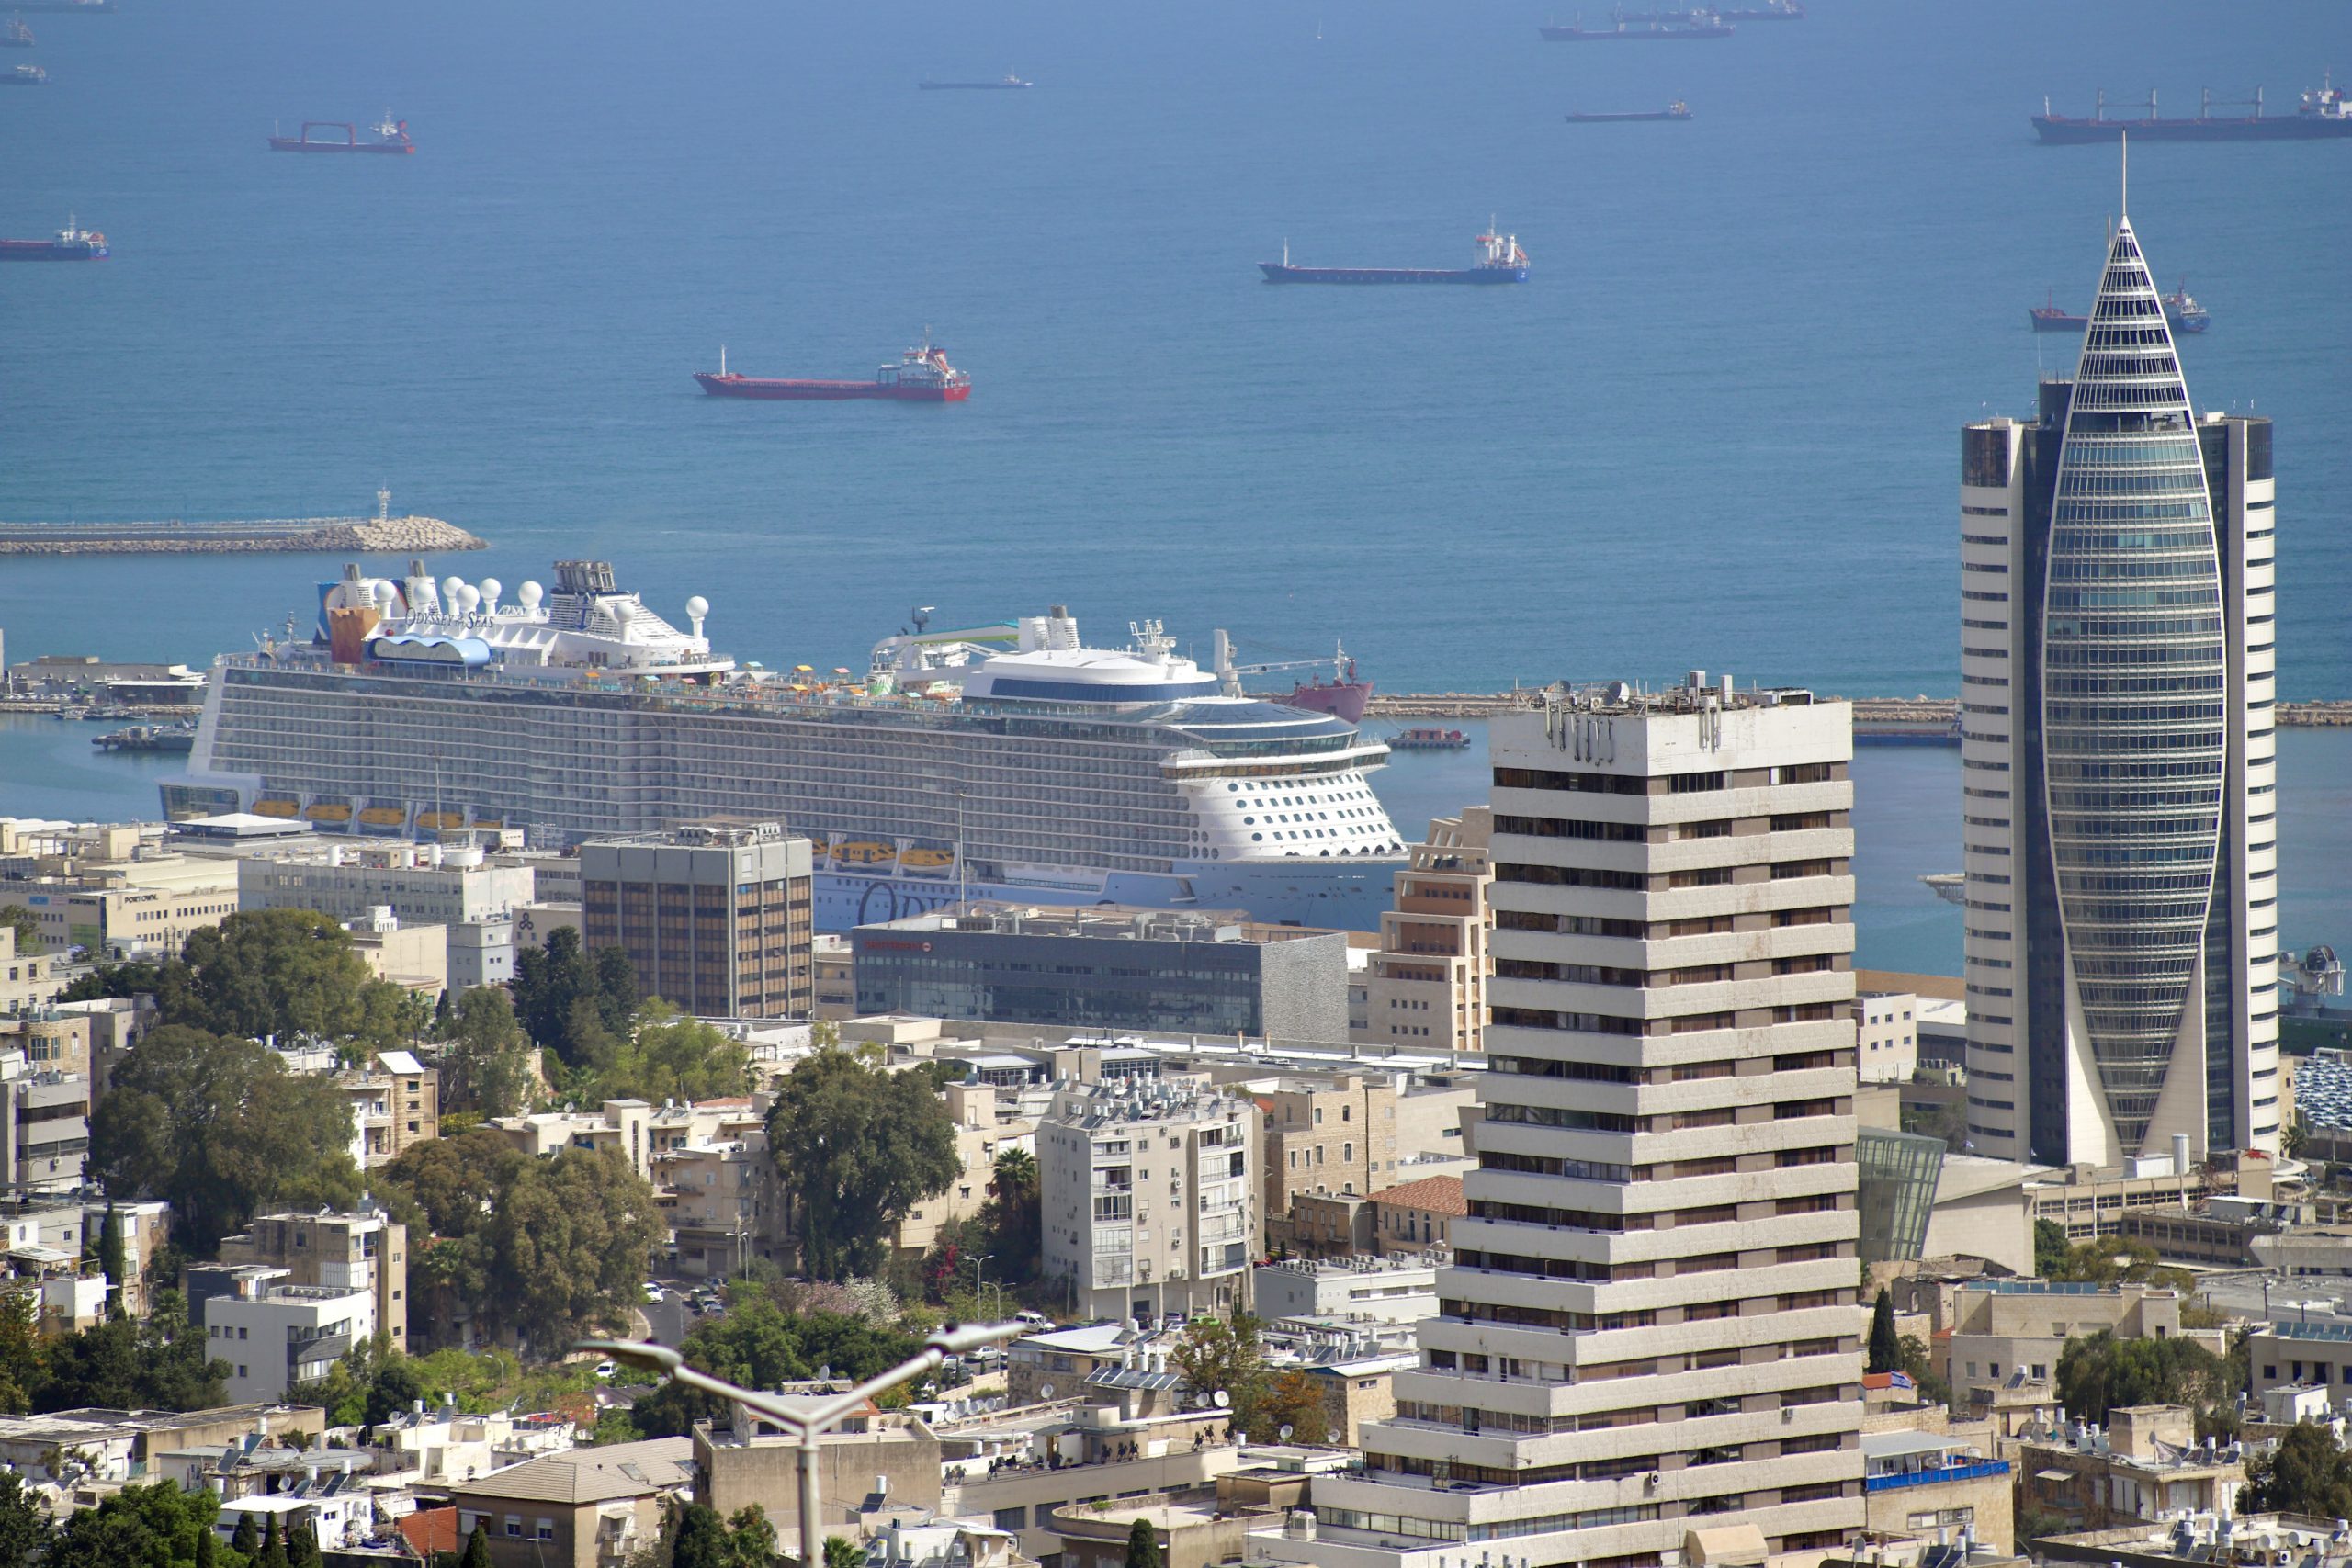 Royal Caribbean's Odyssey Of The Seas Arrives to Haifa for its Maiden Cruise